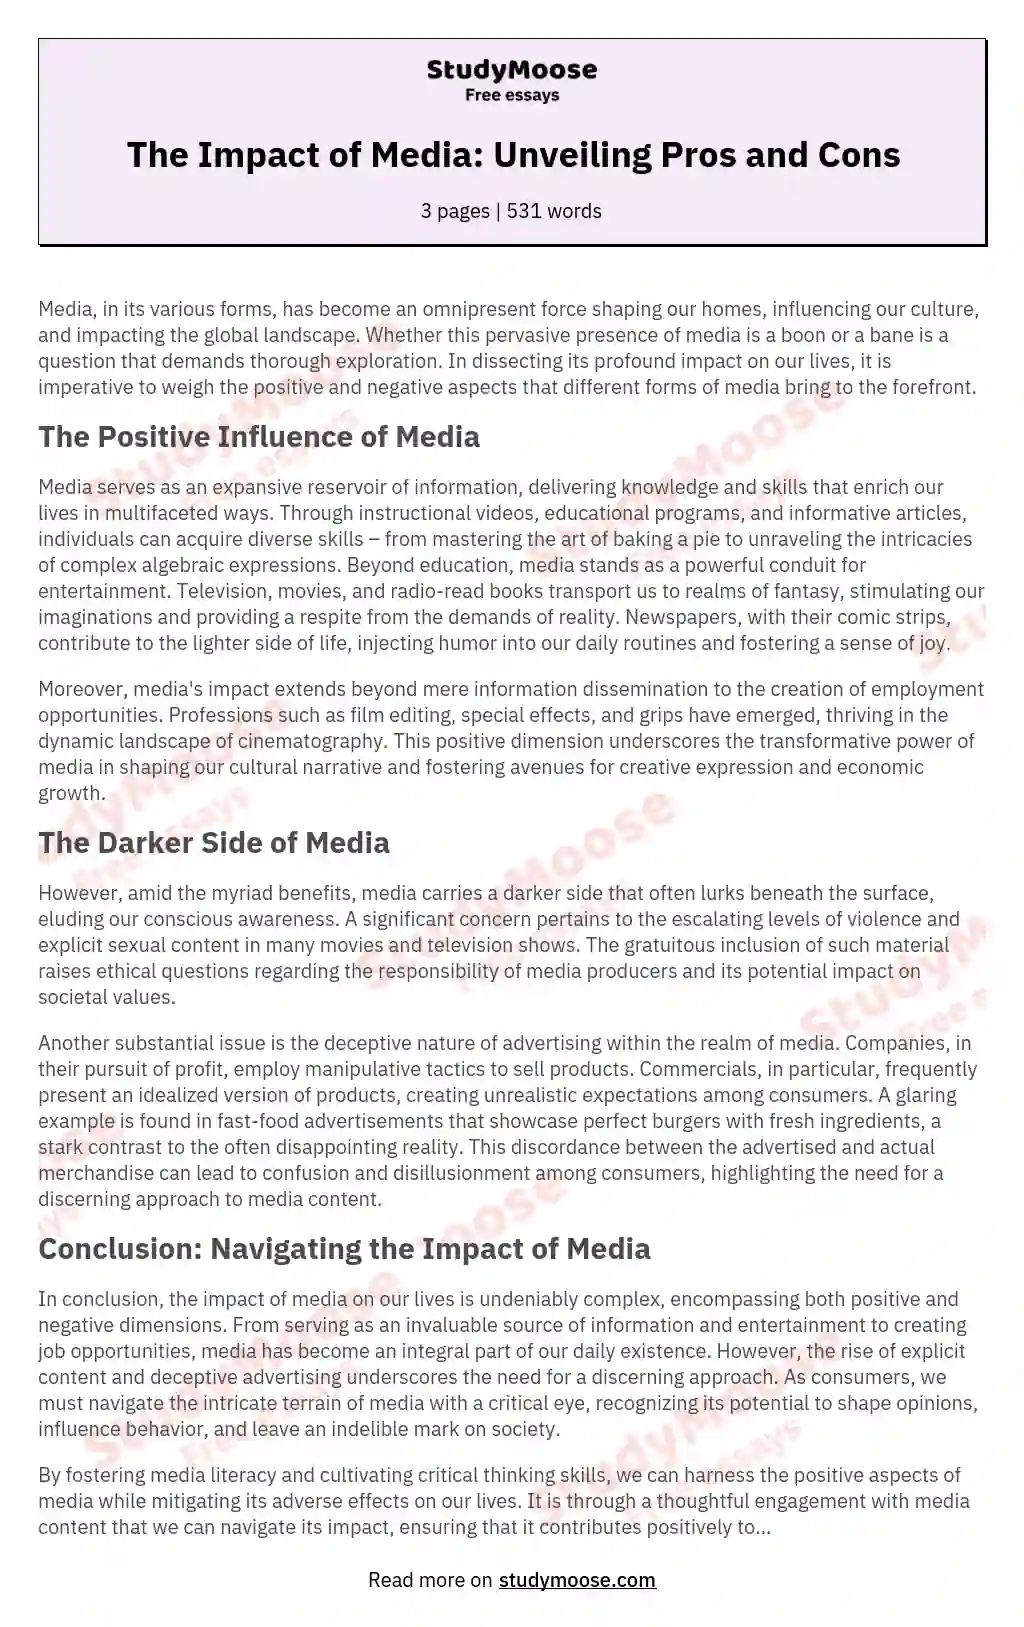 The Impact of Media: Unveiling Pros and Cons essay